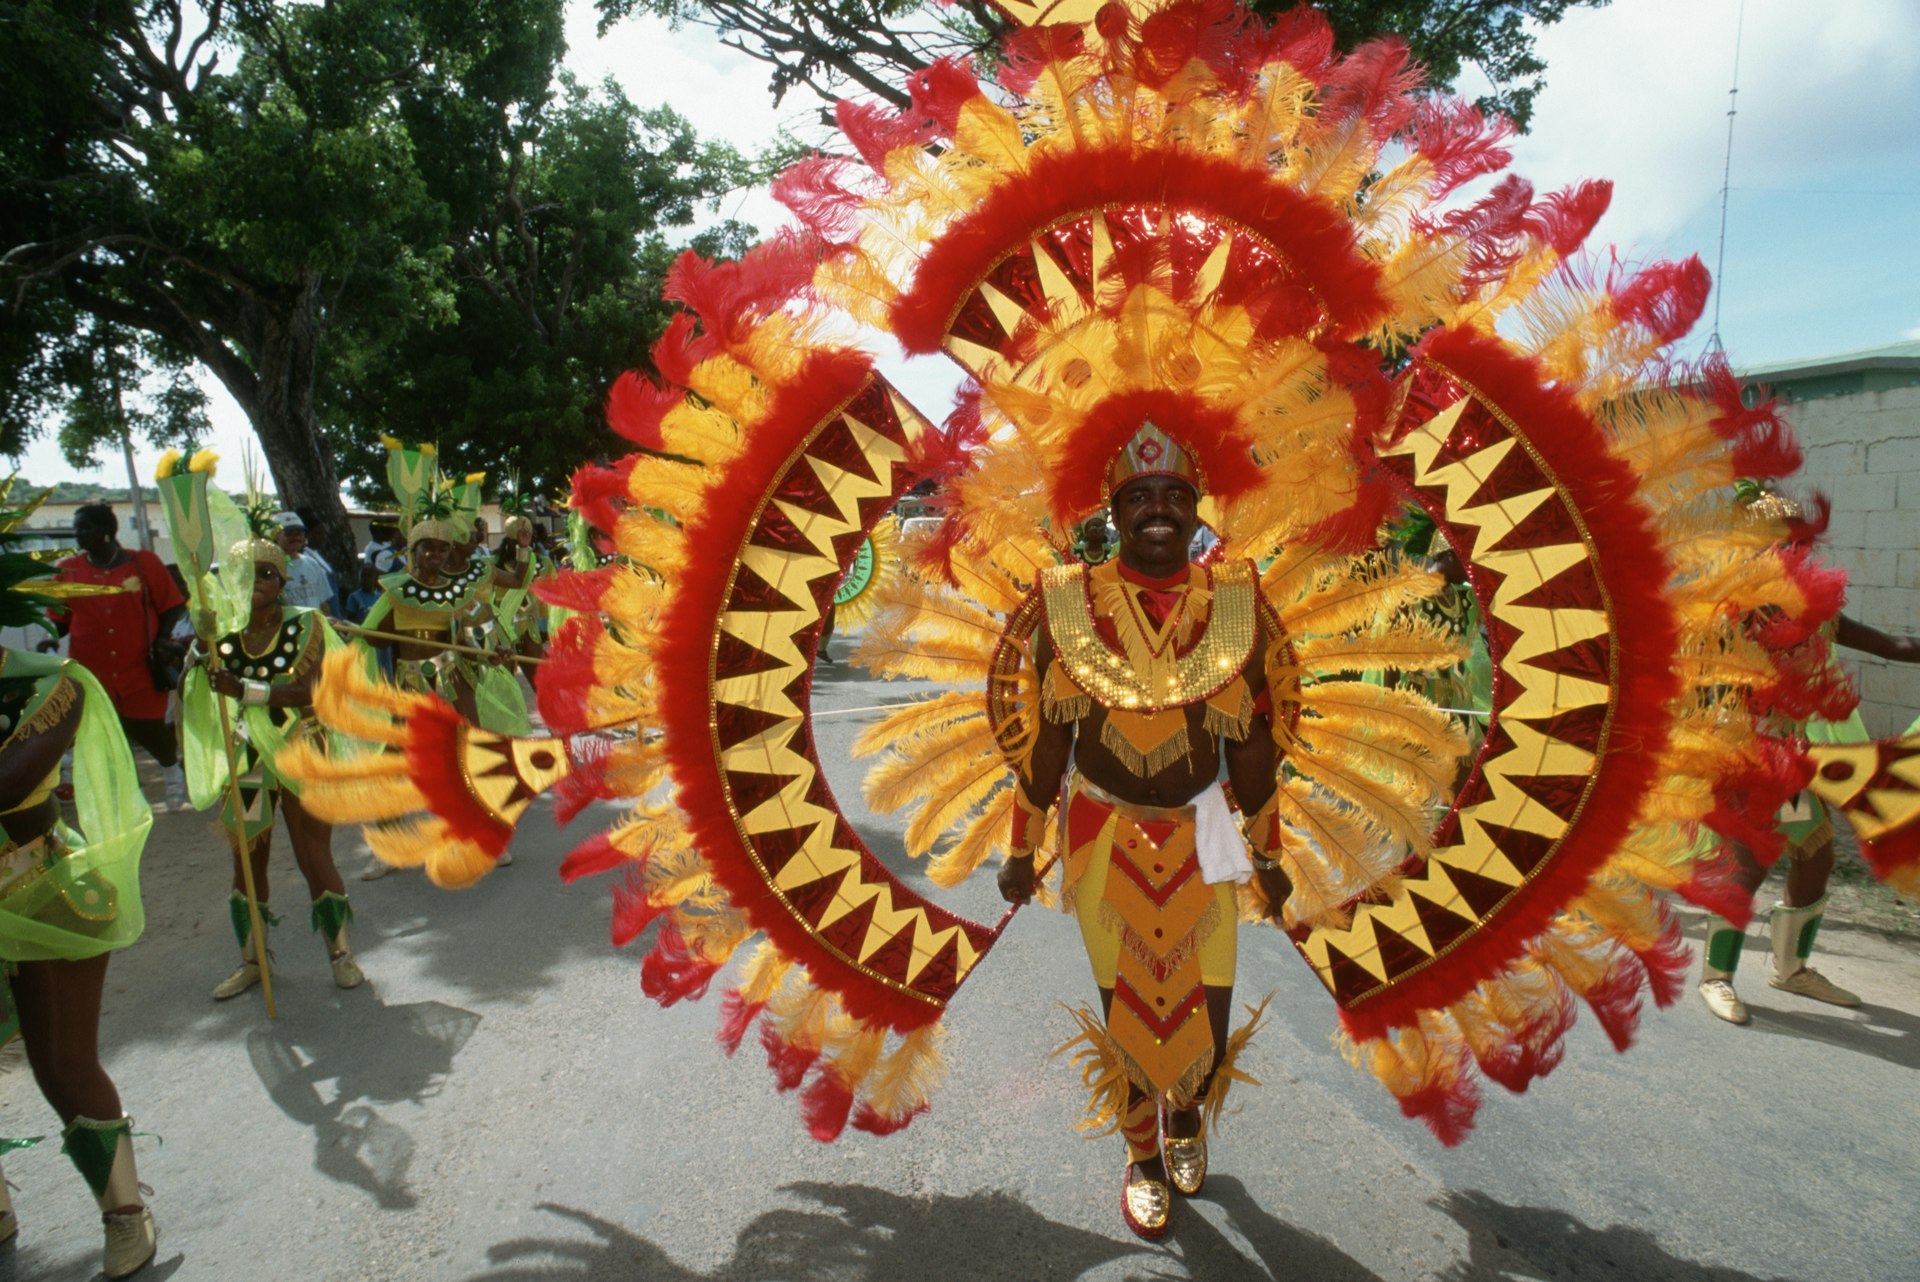 A man dressed in a red and orange feather costume for the Parade of Troupes in Anguilla